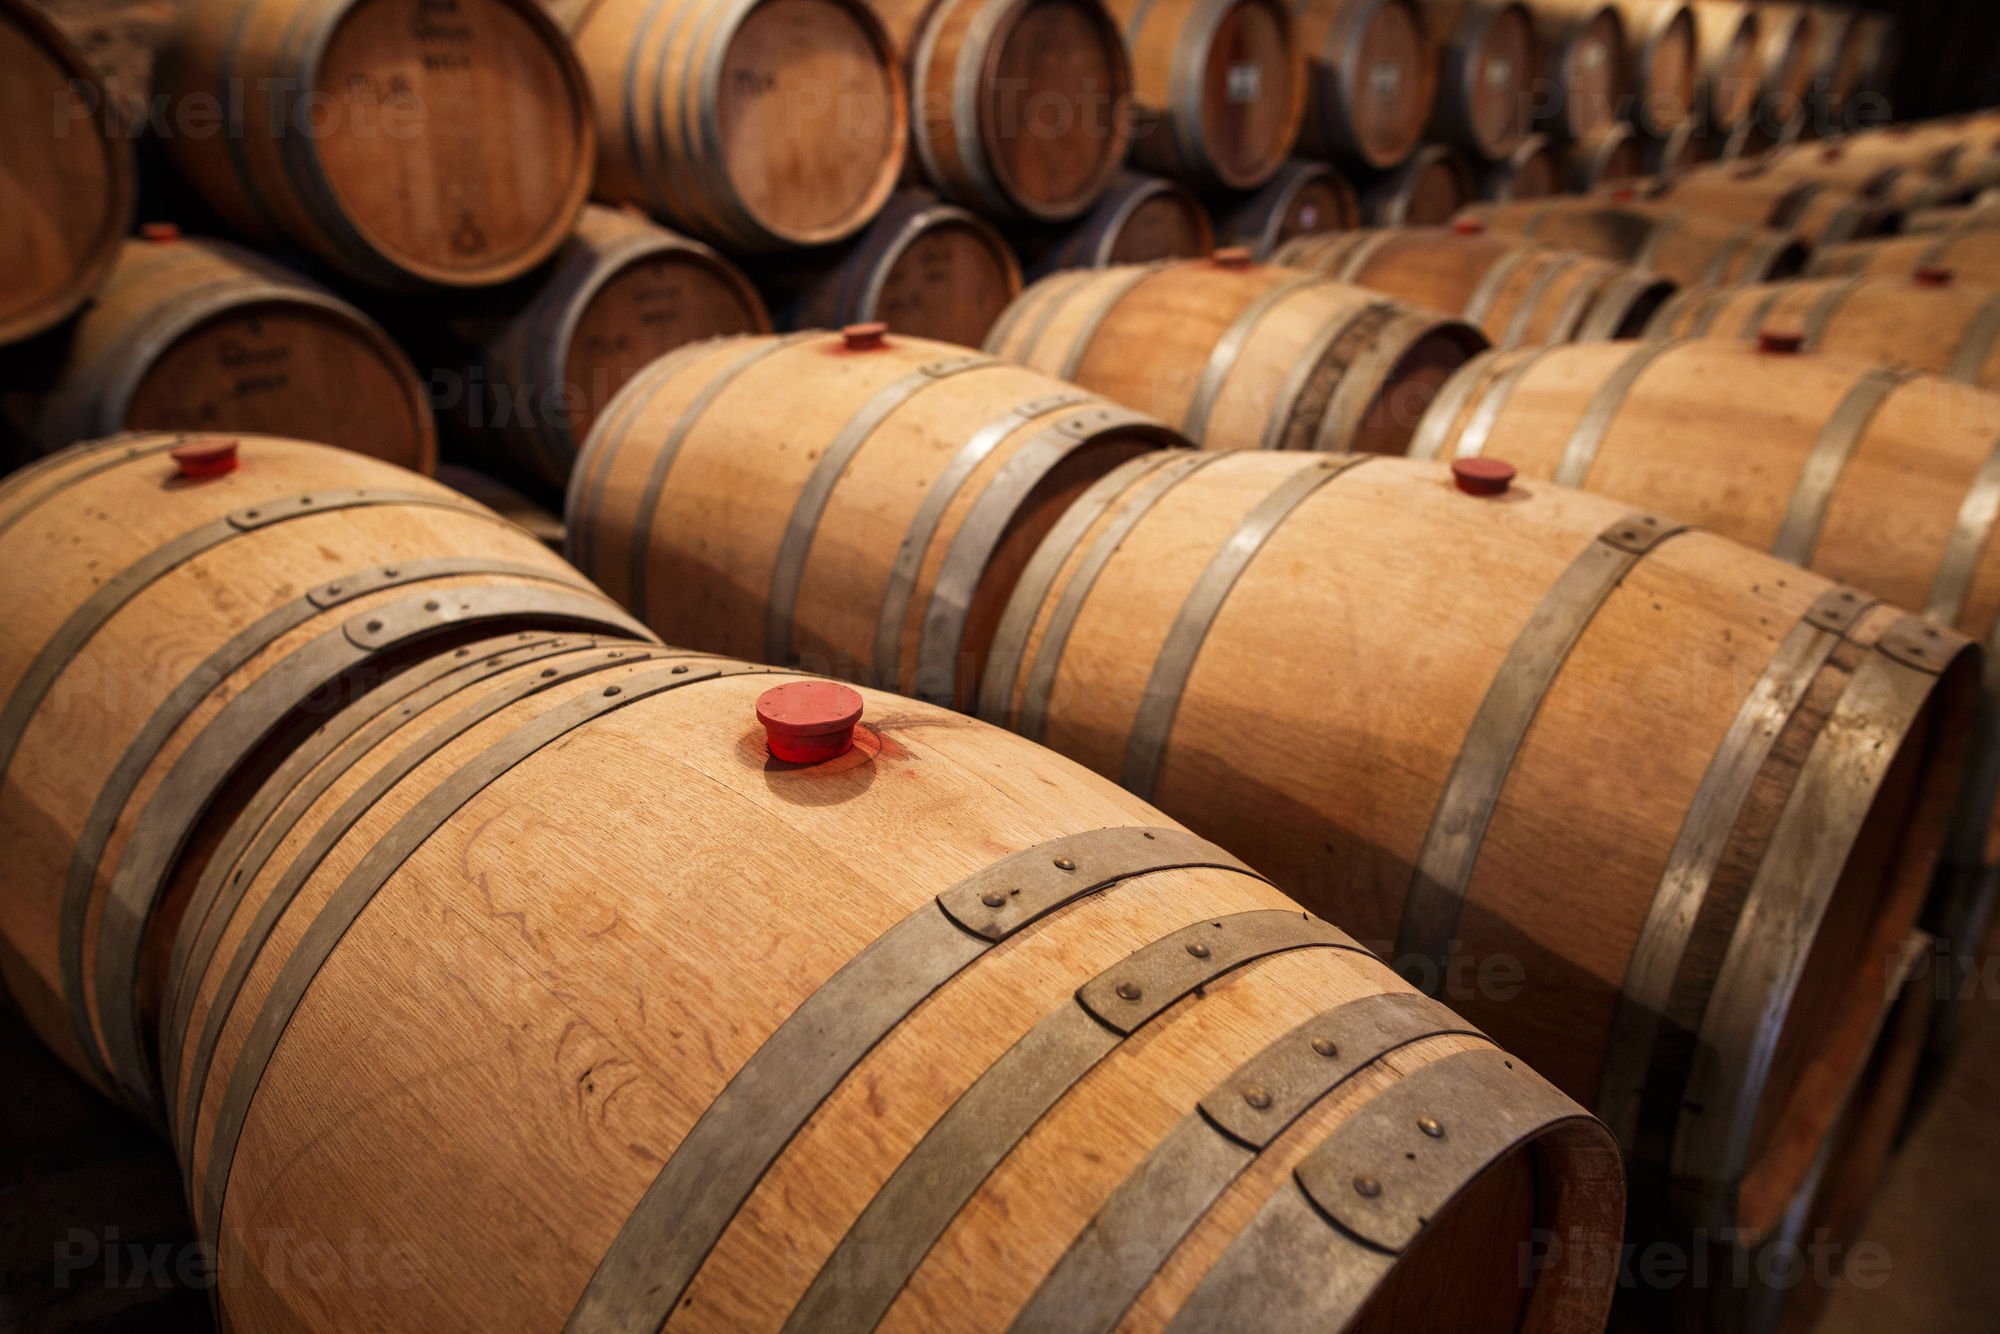 Pv Lg View Of Wine Barrels In Cellar Default Stock Photo 